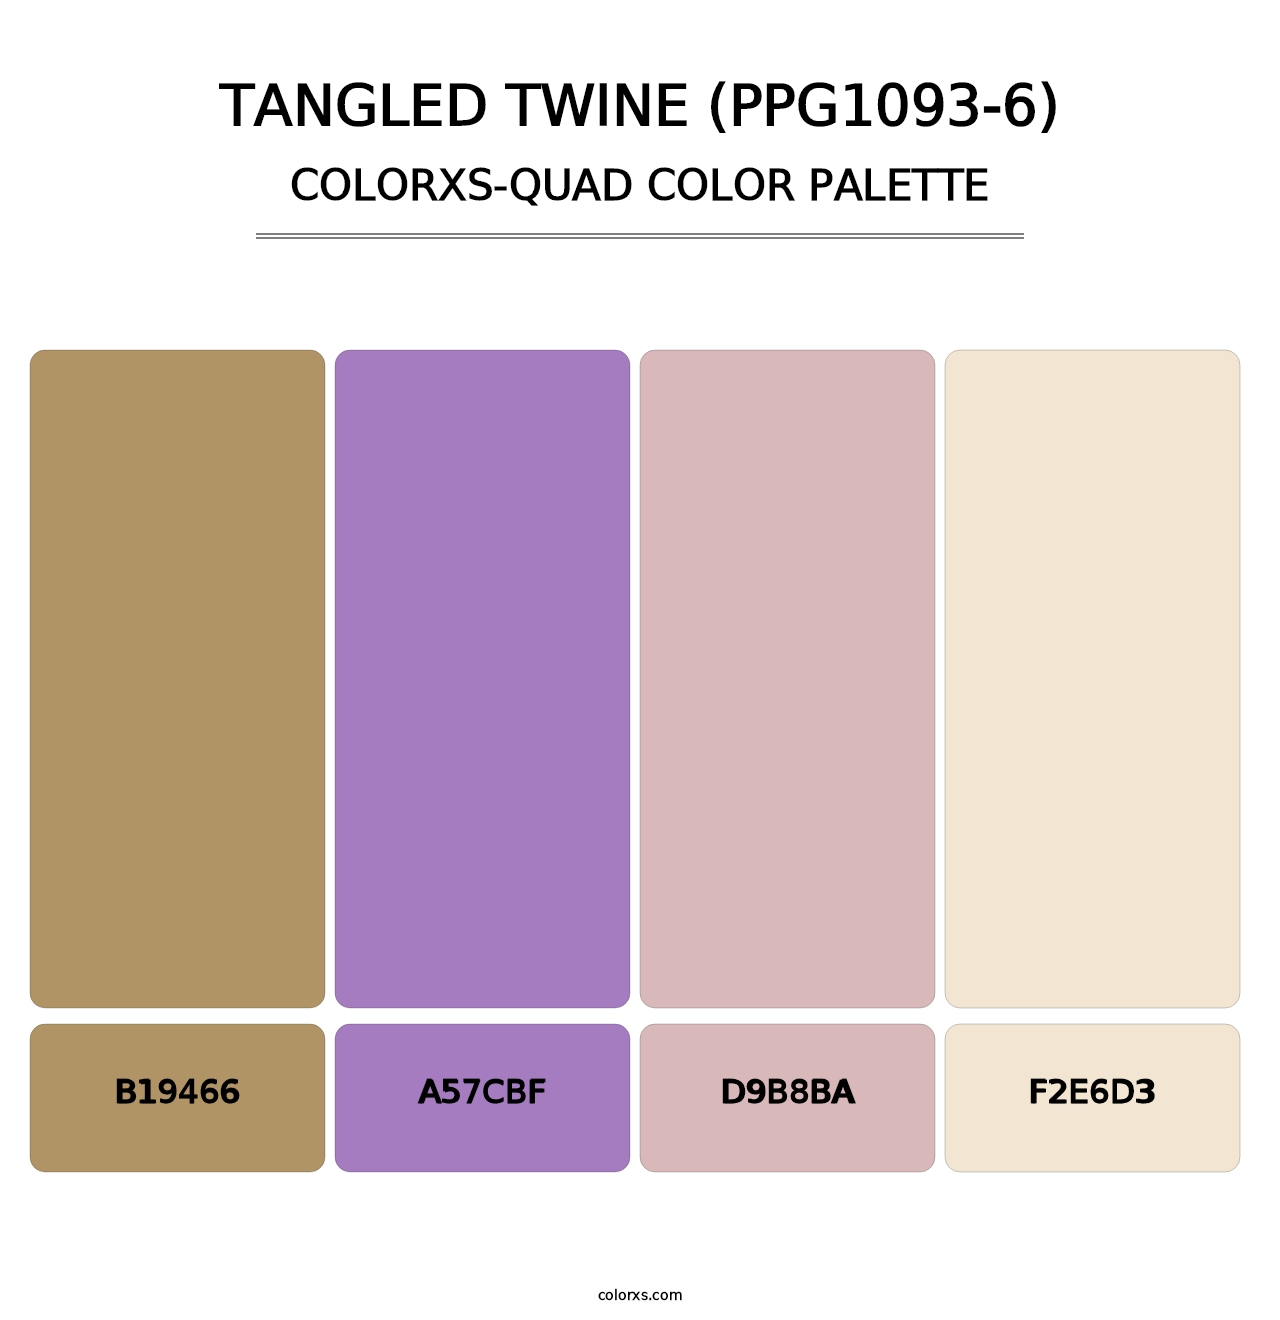 Tangled Twine (PPG1093-6) - Colorxs Quad Palette